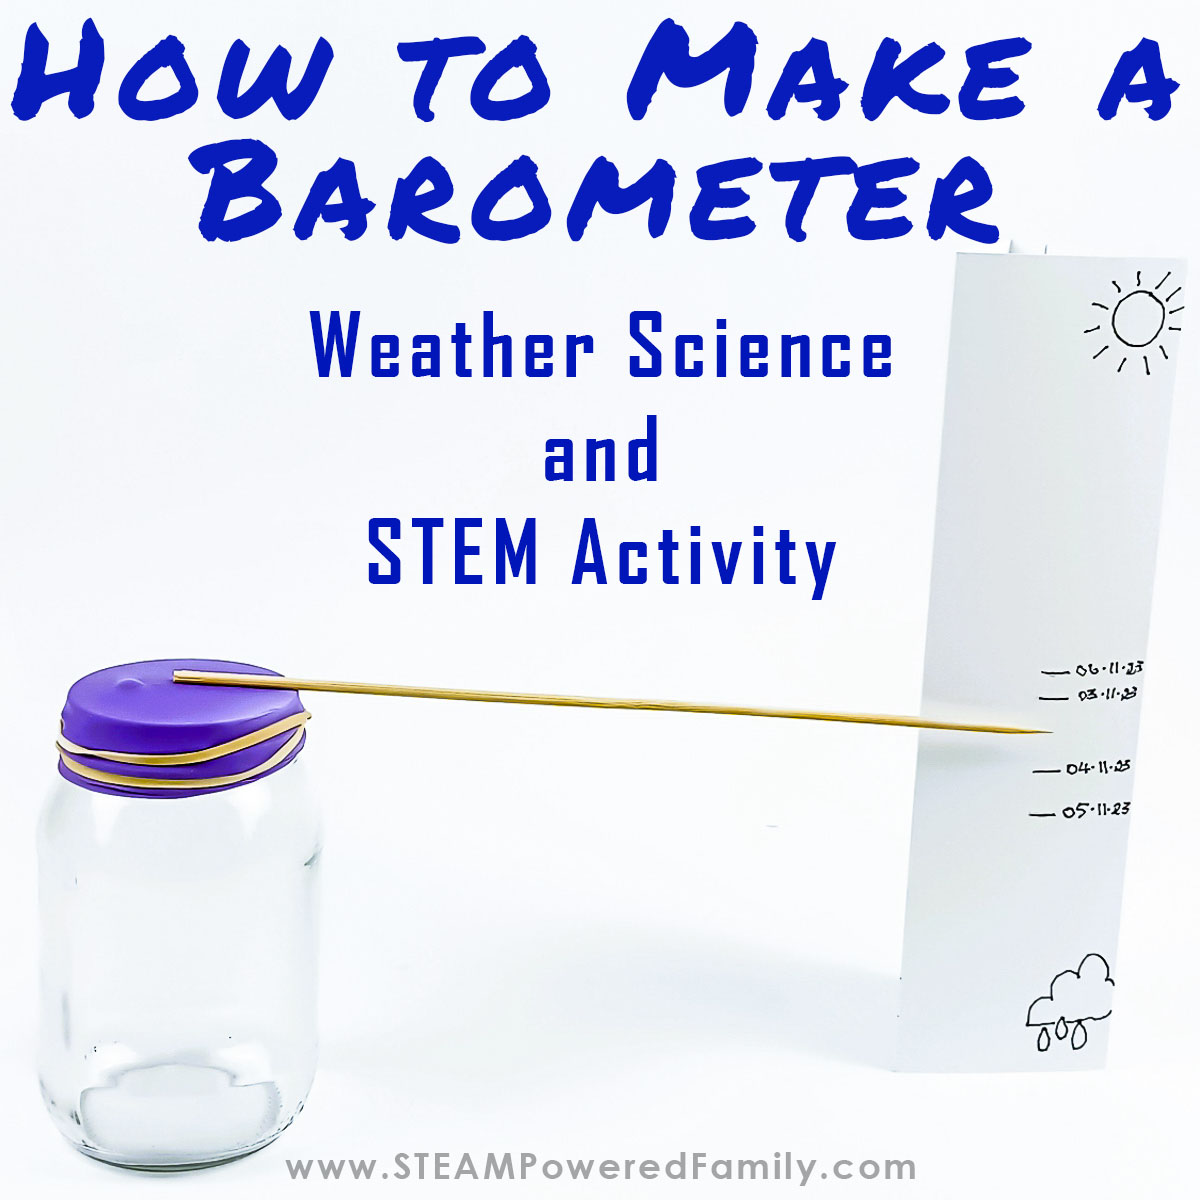 How to Make a Barometer